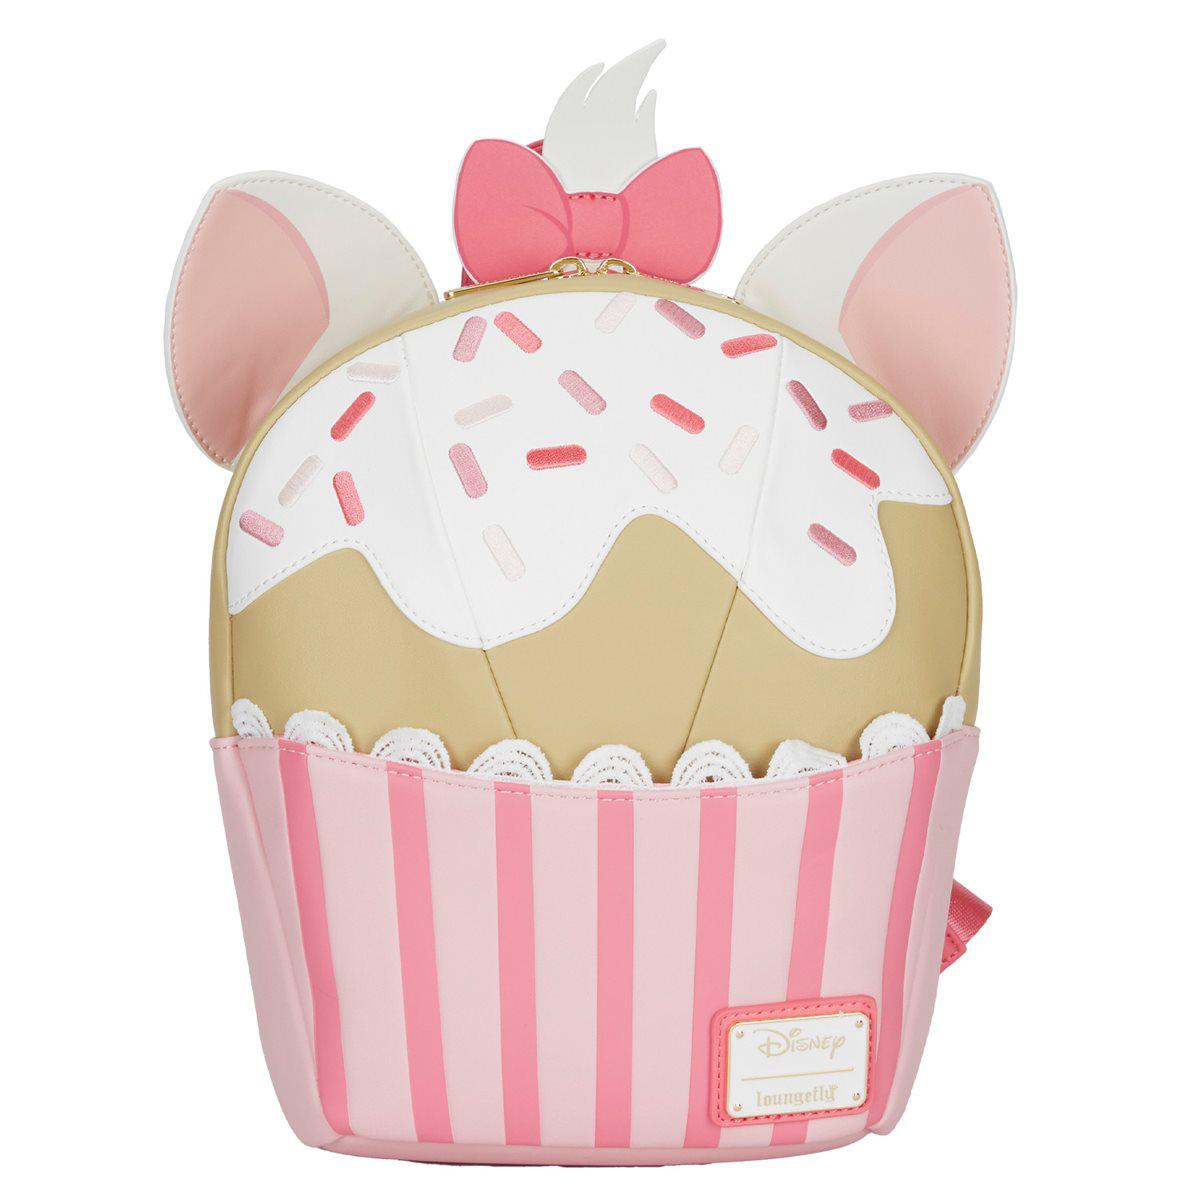 Loungefly The Aristocats Marie Cupcake Mini-Backpack | Officially Licensed